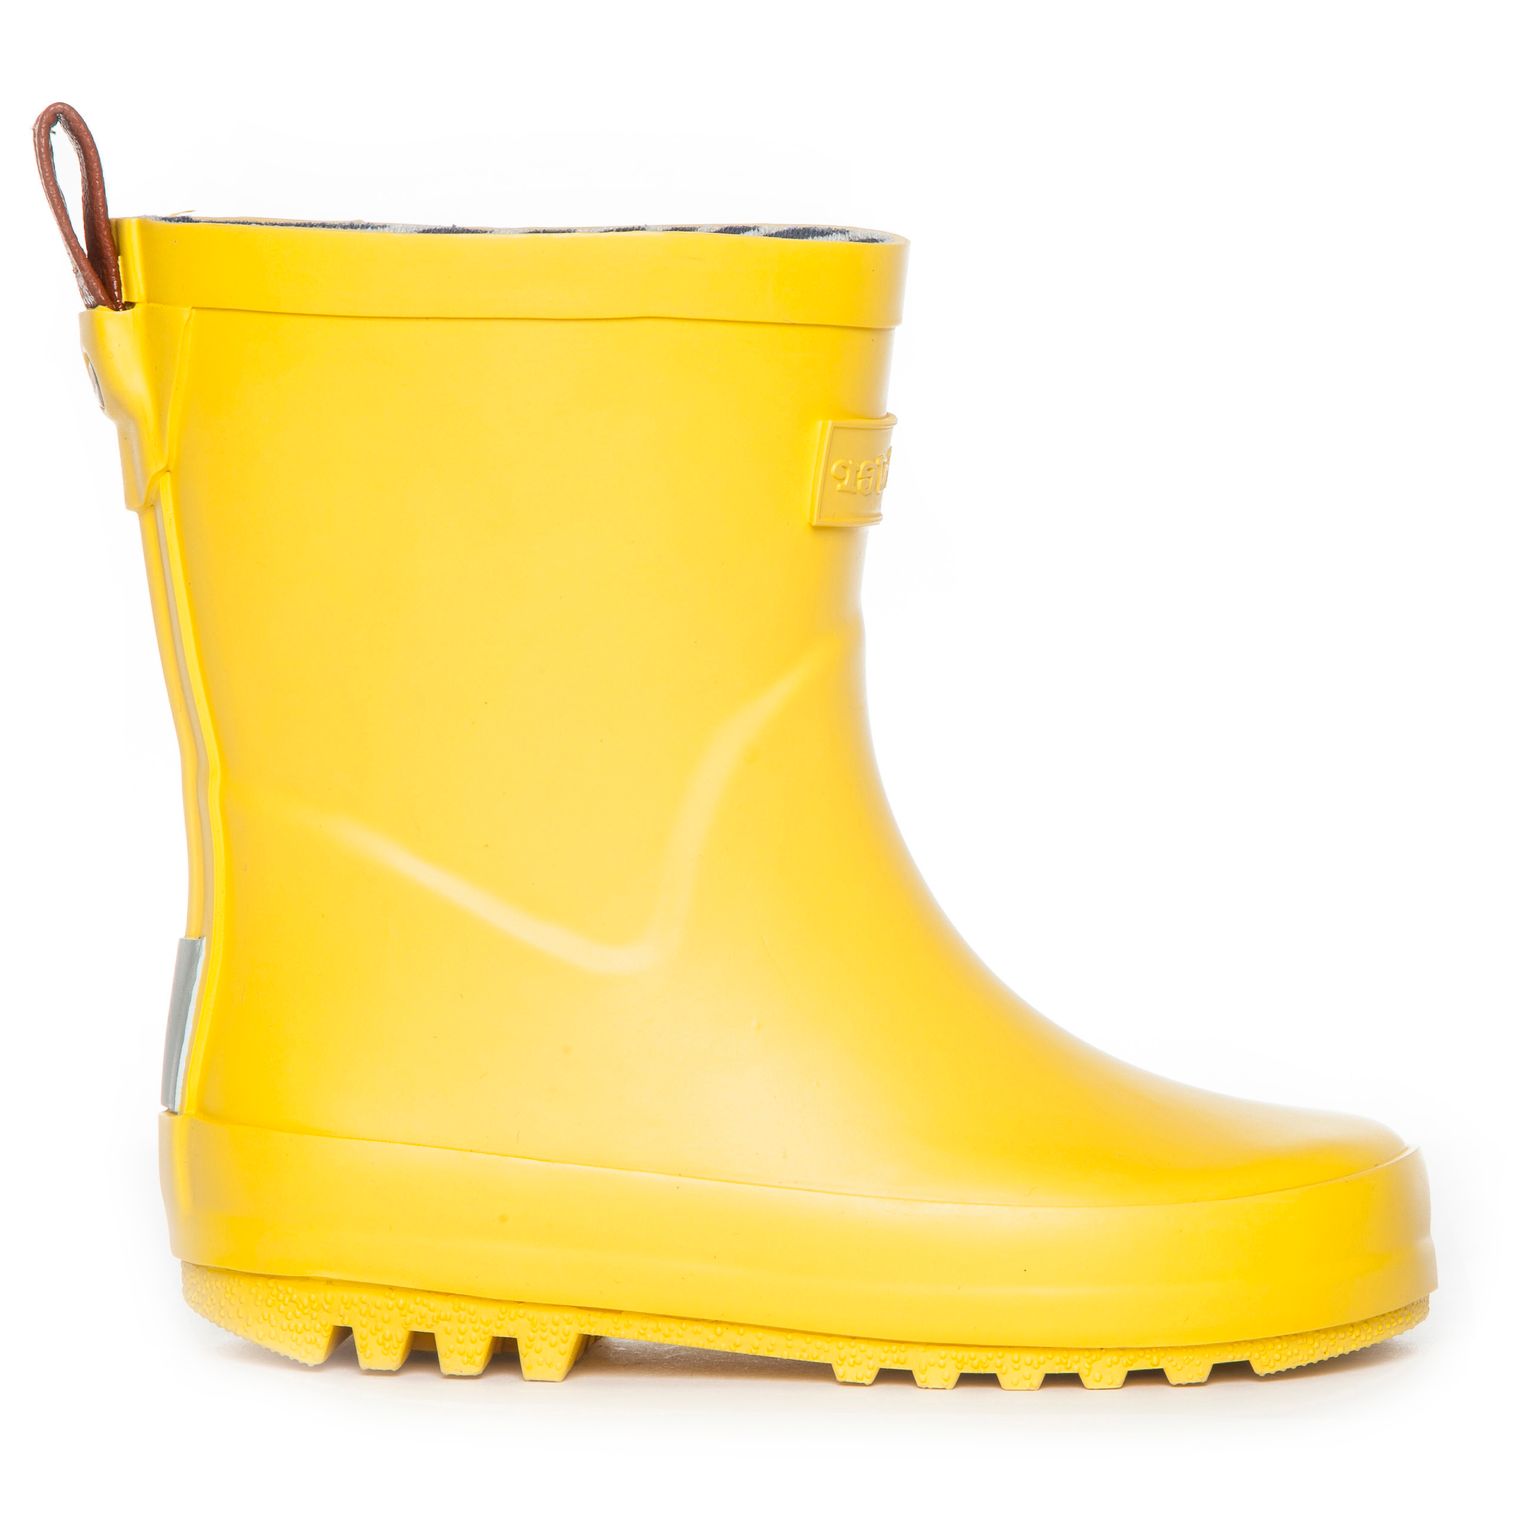 Kids' Rubberboots Yellow